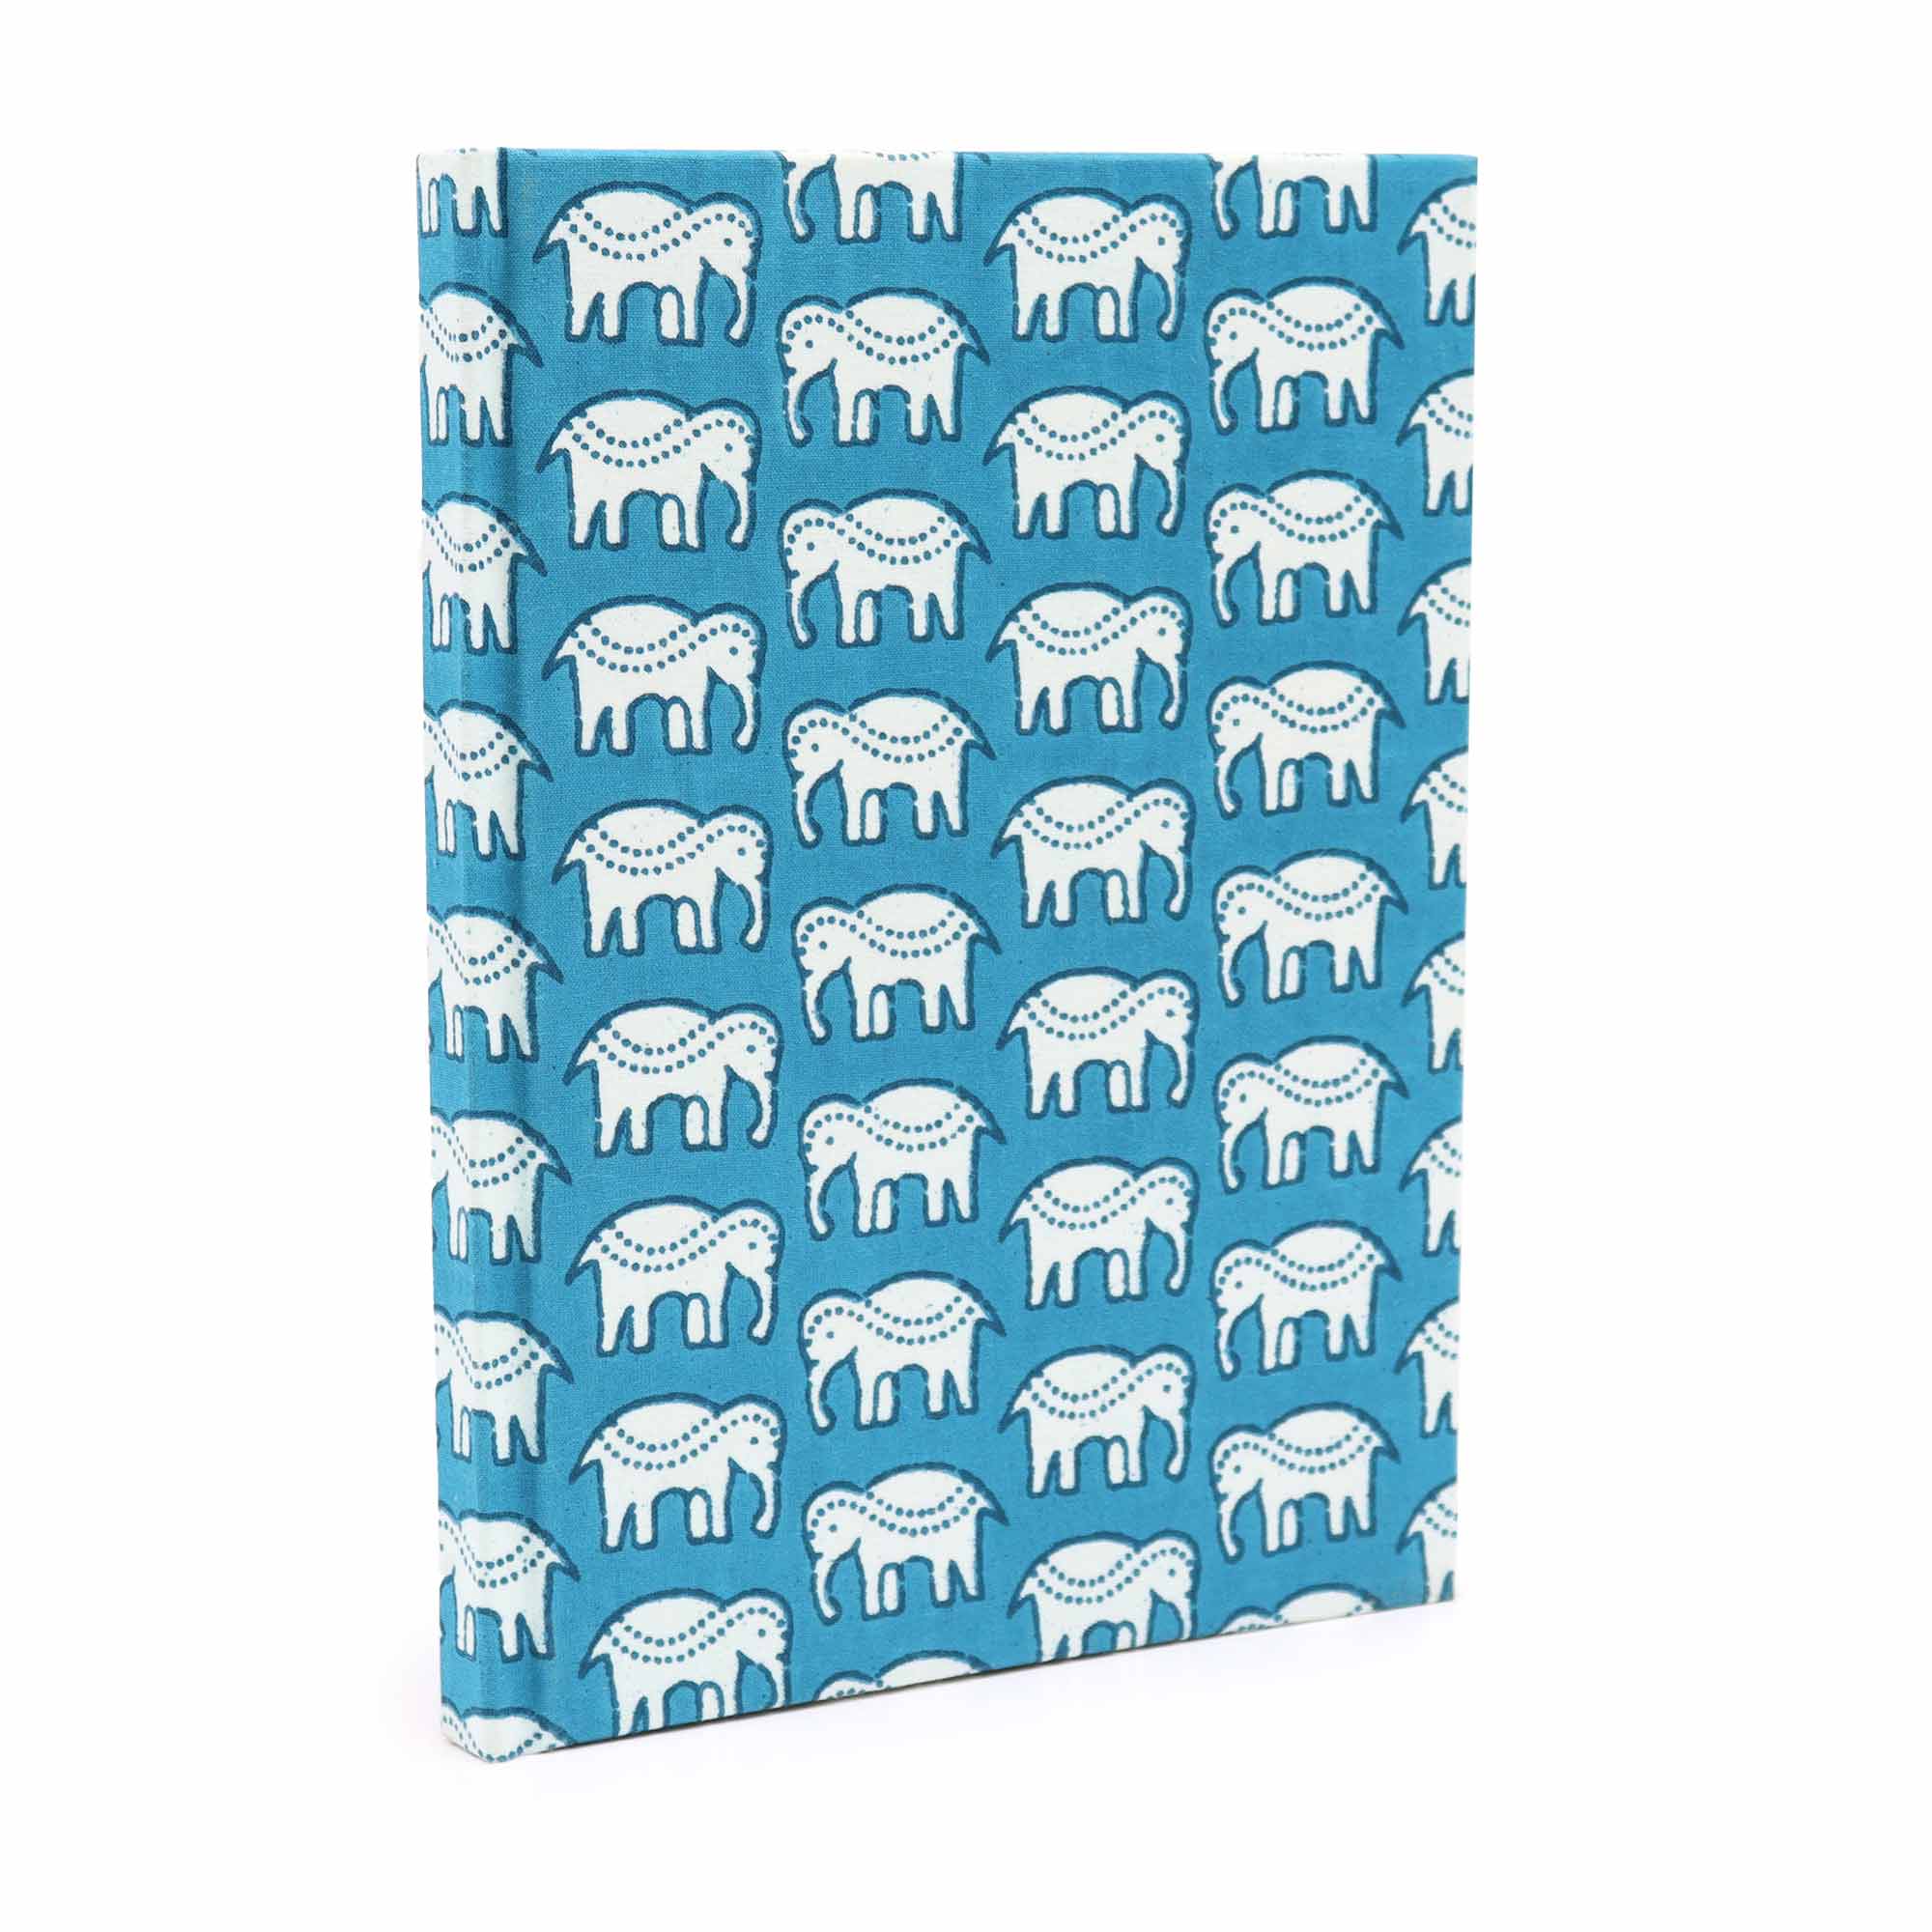 View Cotton Bound Notebooks 20x15cm 96 pages Teal Elephants information